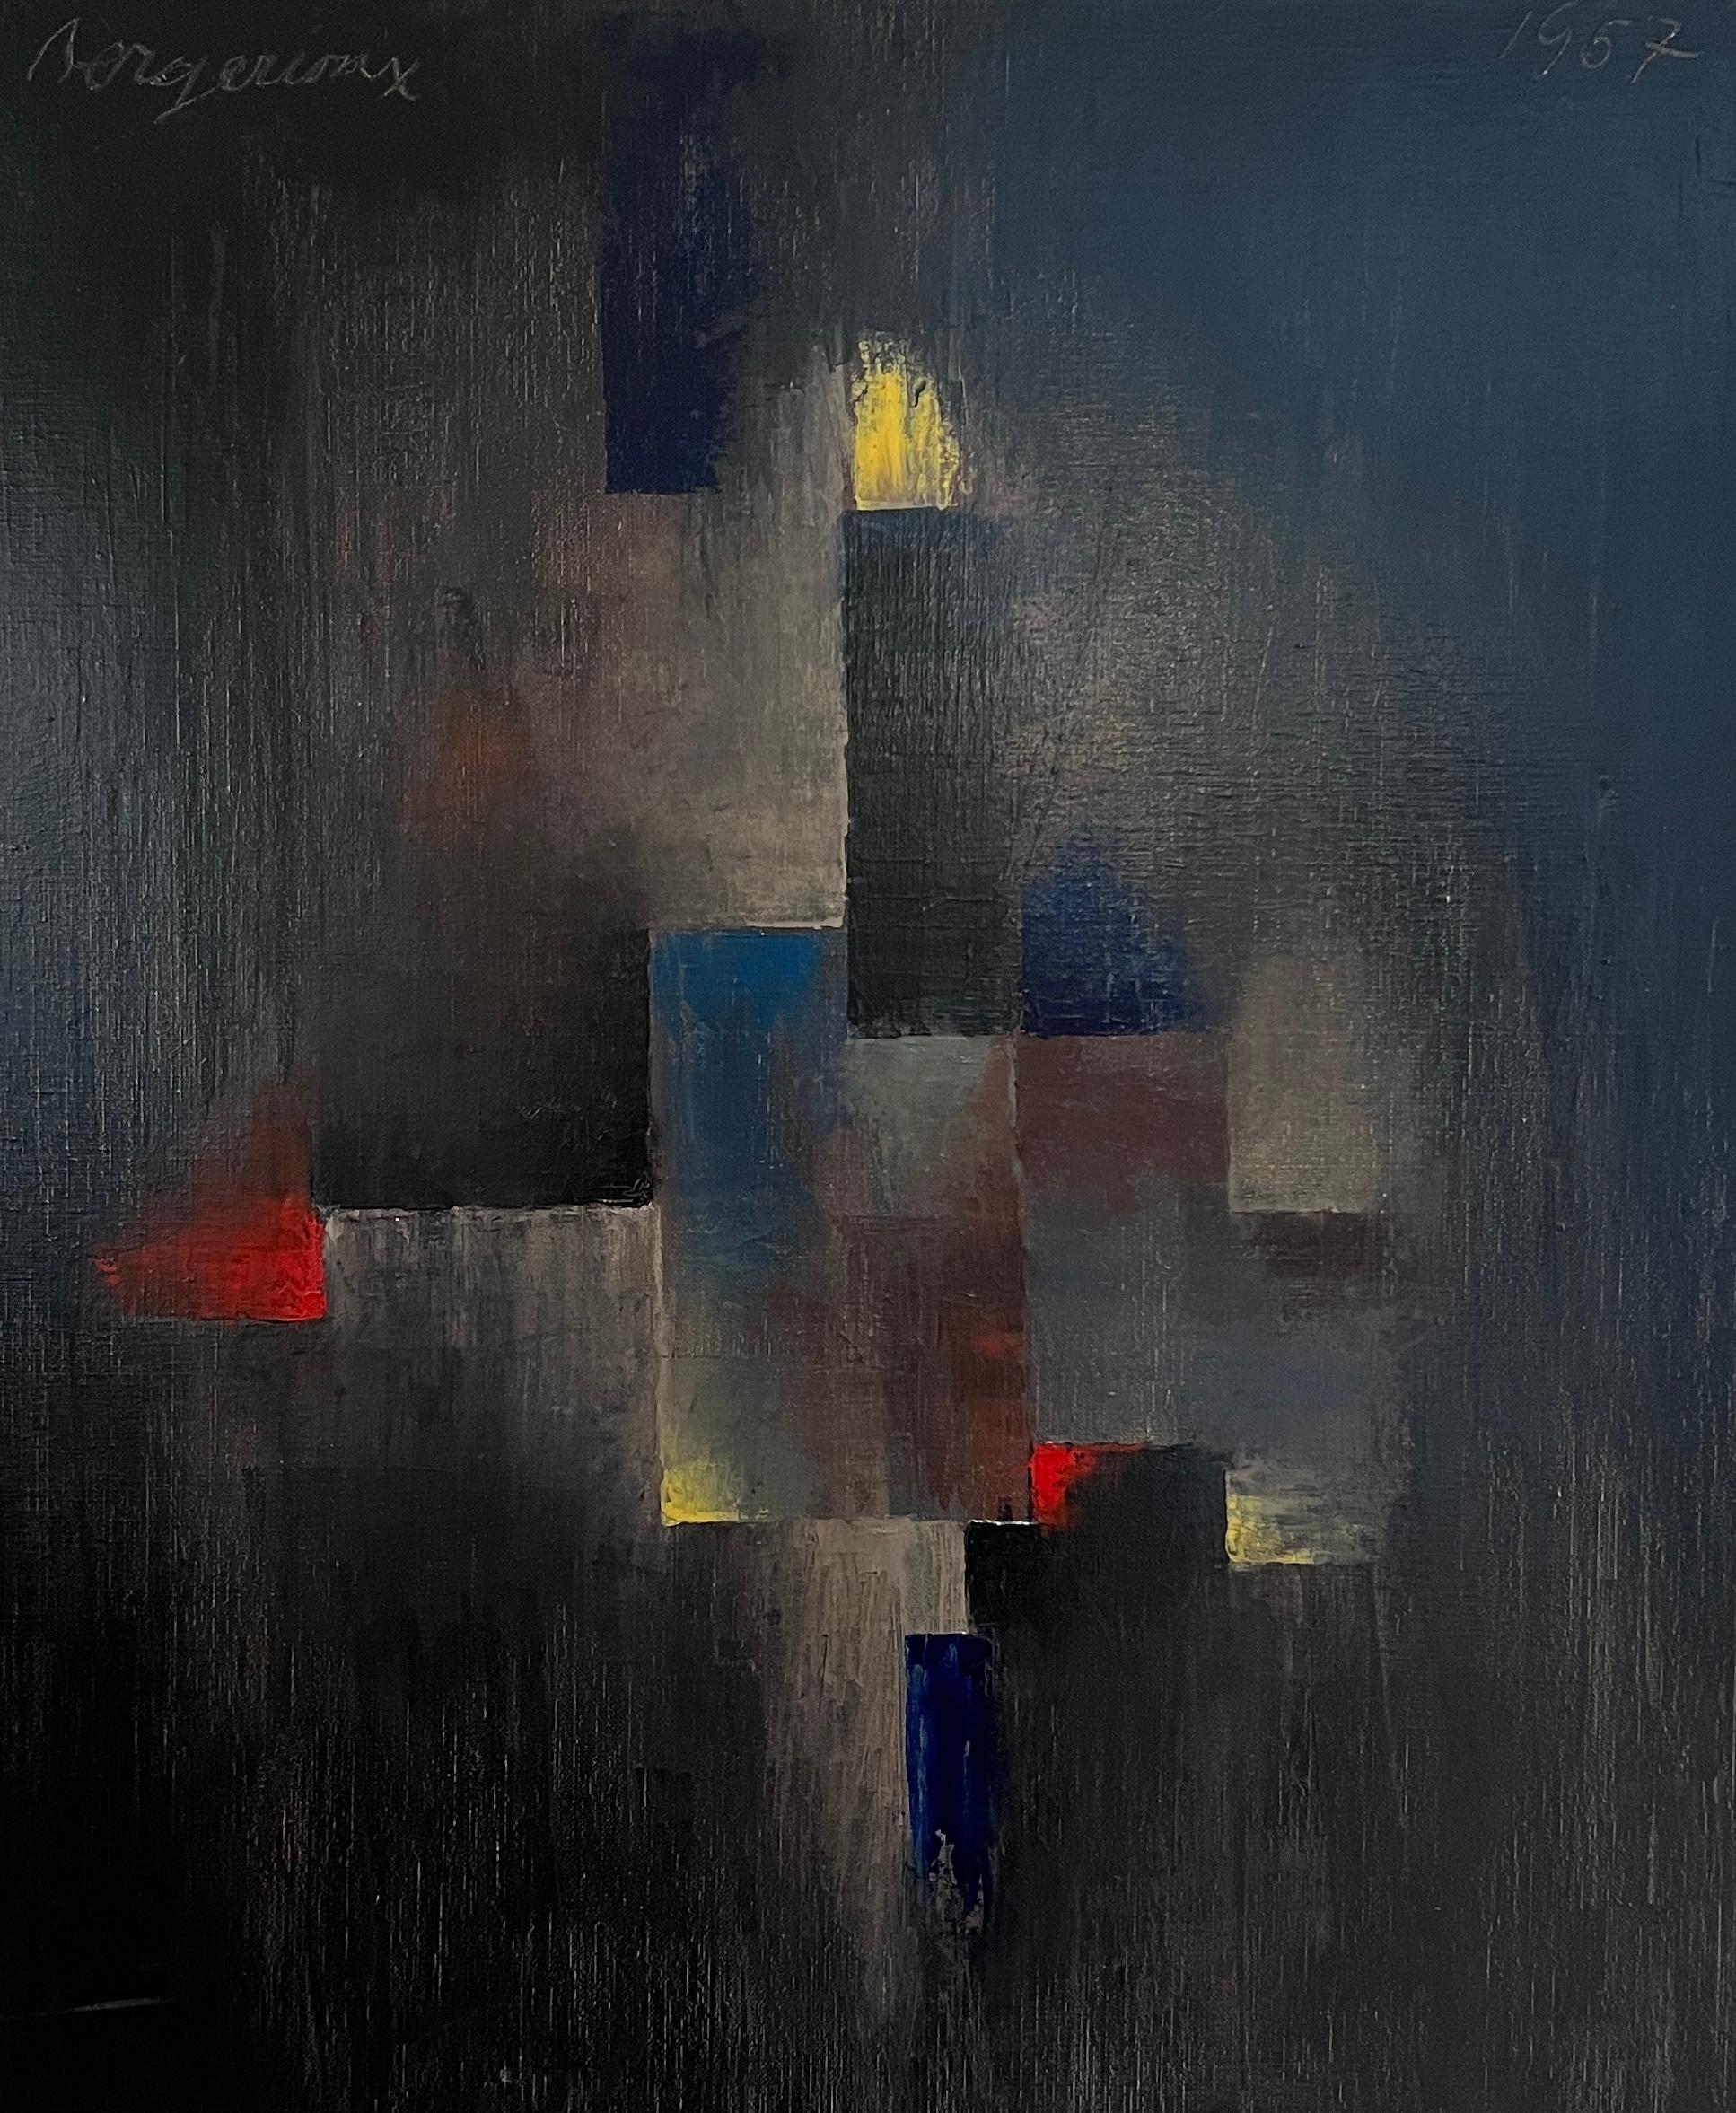  Bergerioux Abstract Painting - Composition